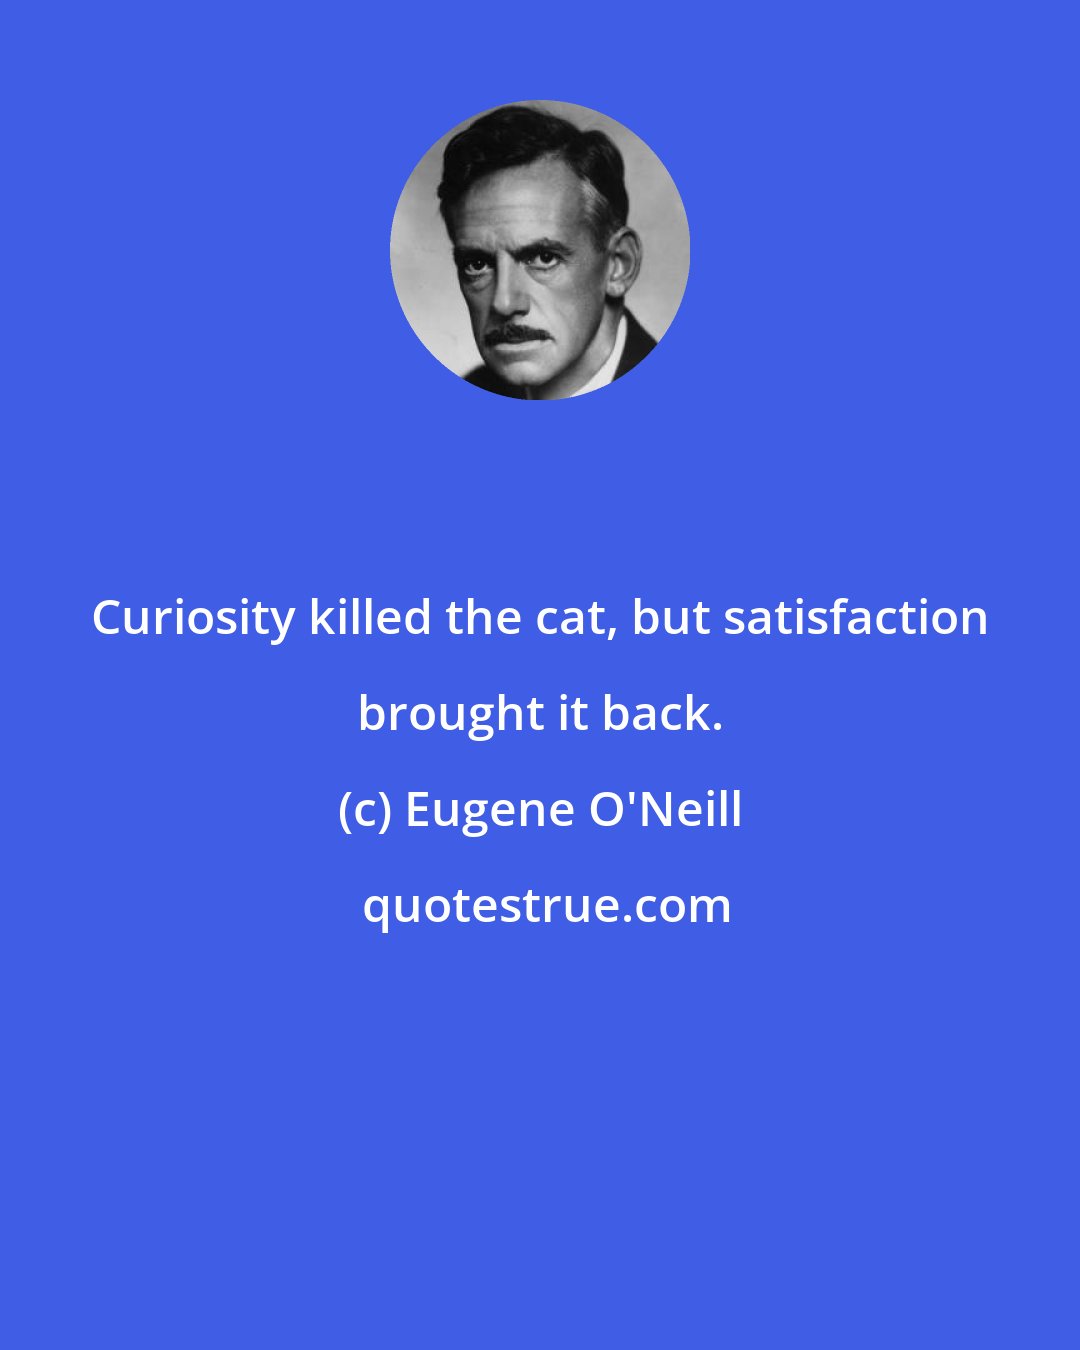 Eugene O'Neill: Curiosity killed the cat, but satisfaction brought it back.